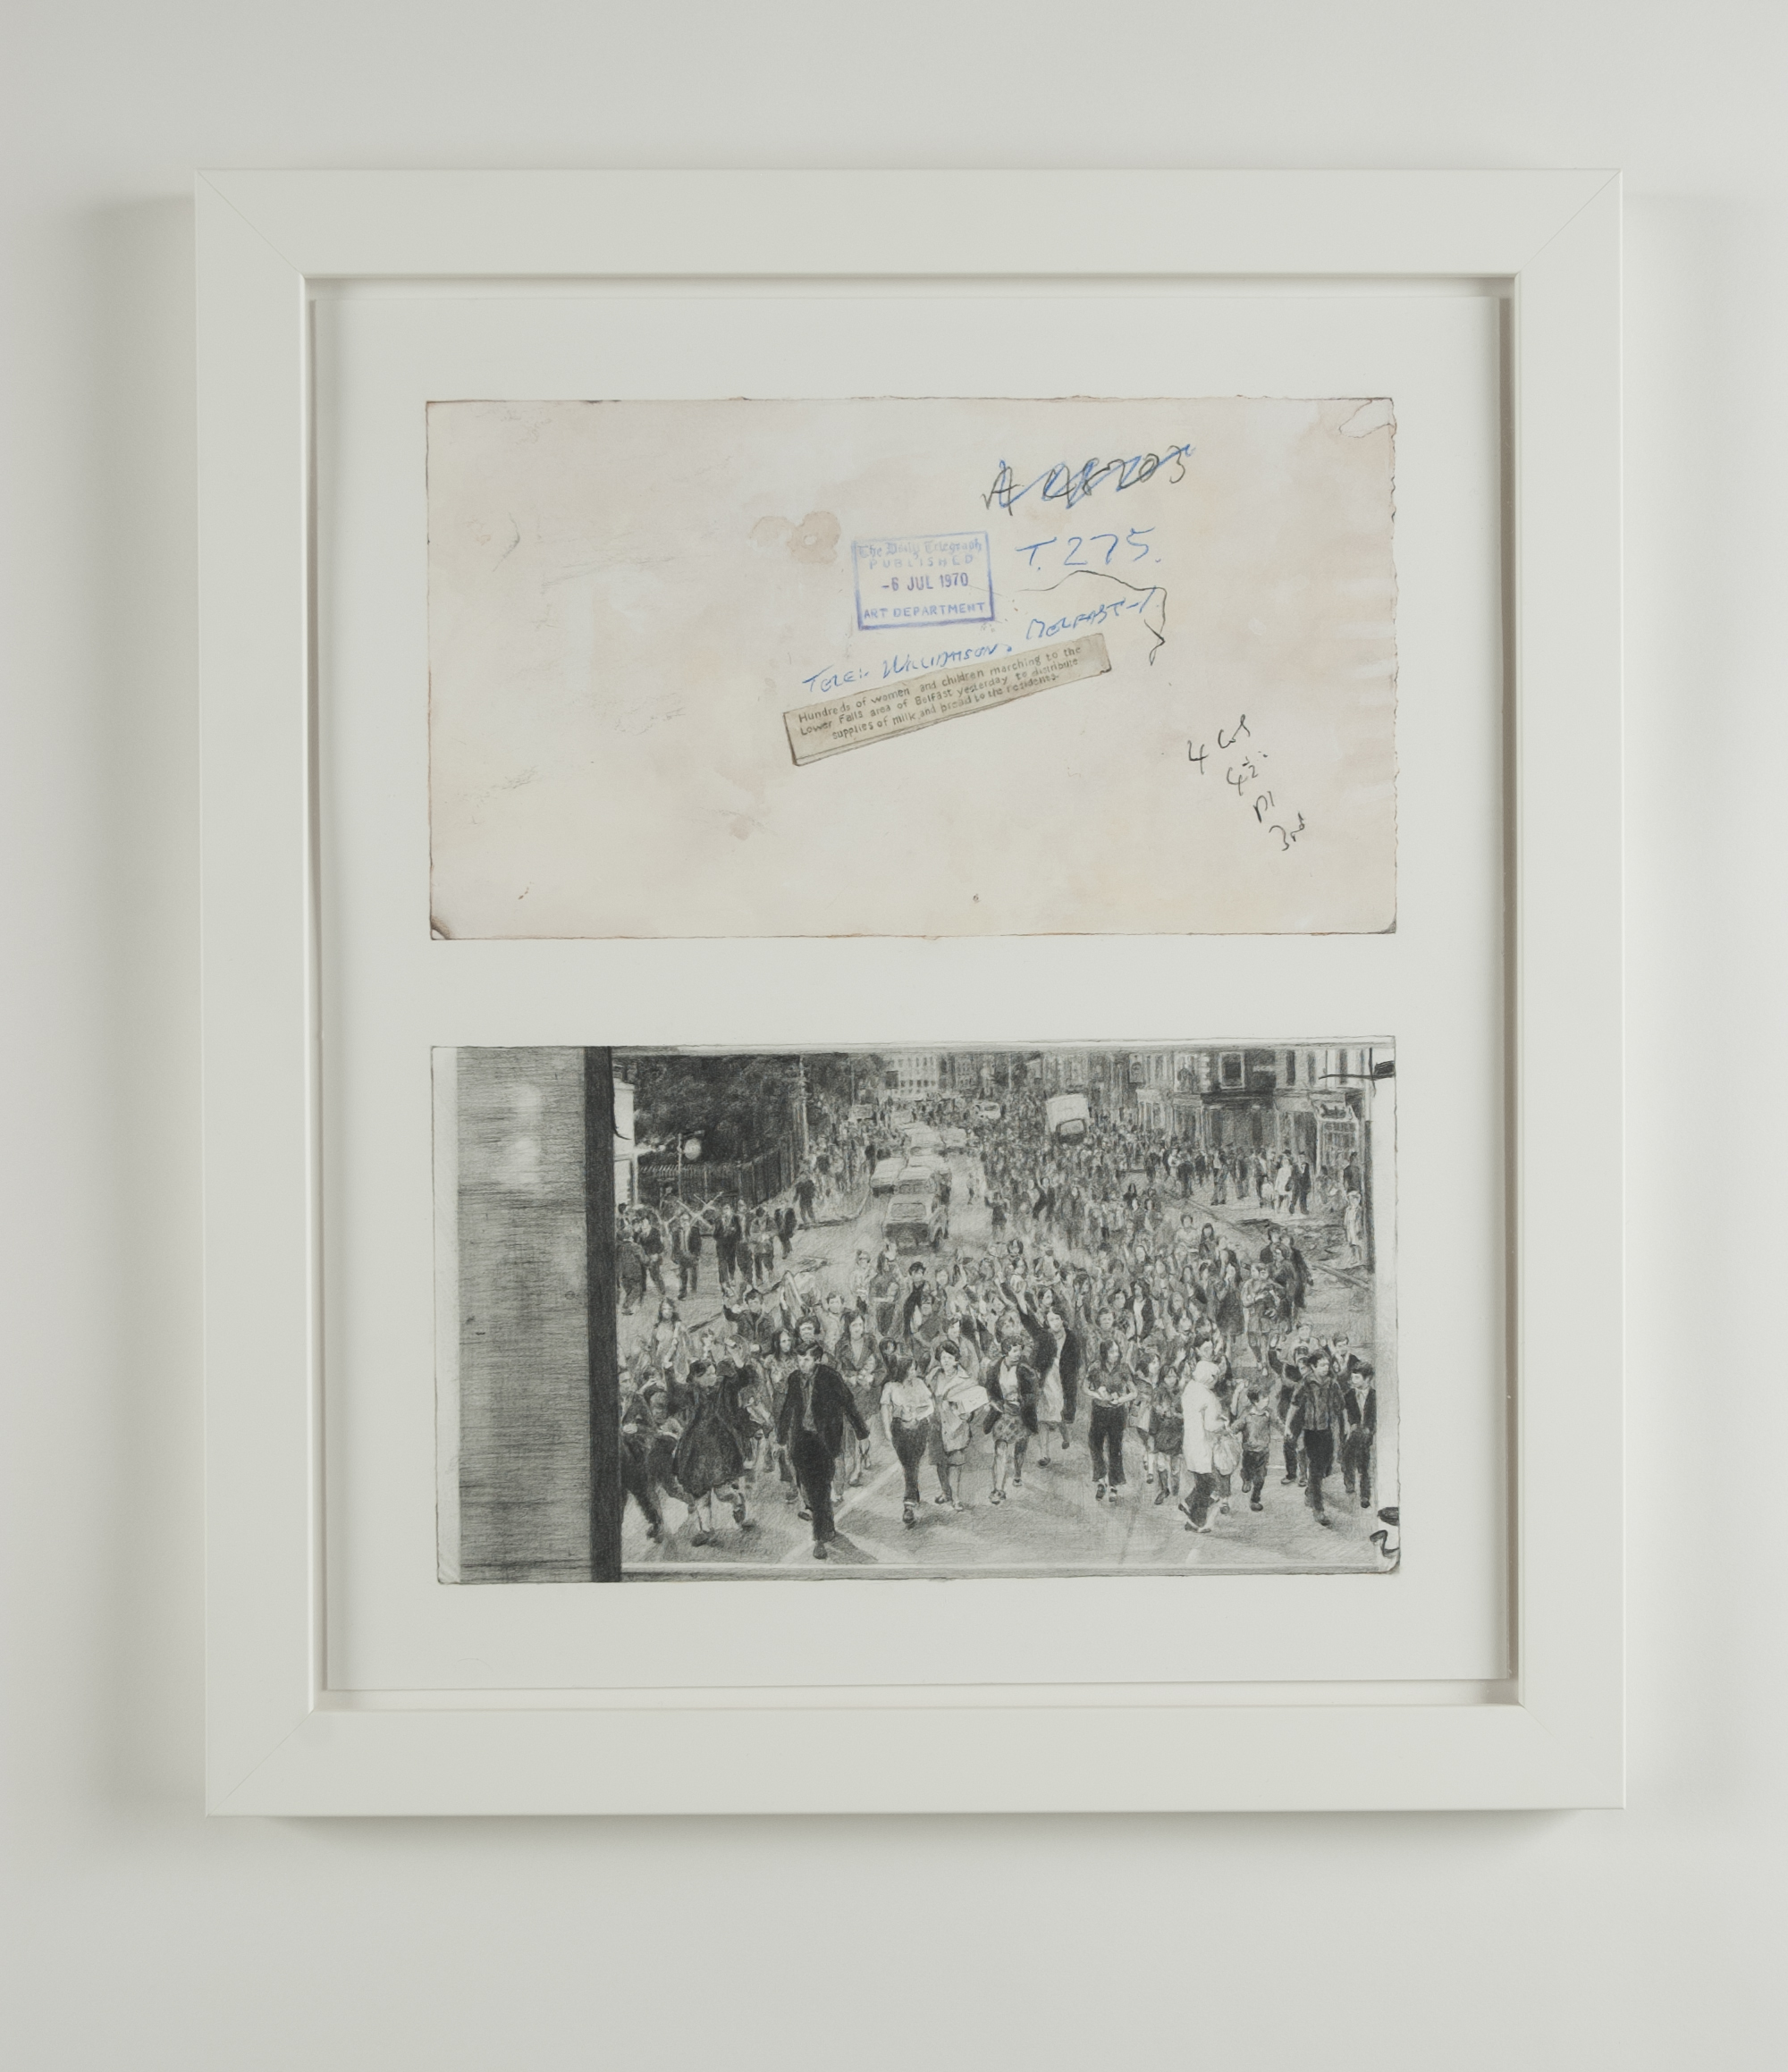   Untitled (Rumination on Borders, I),  2019 Detail 1 of 4 Graphite, Color Pencil, and Gouache on Paper  40.6 x 47 cm (16 x 18.4 inches)  Source Image: Archival photograph from The Daily Telegraph from 6 July 1970 